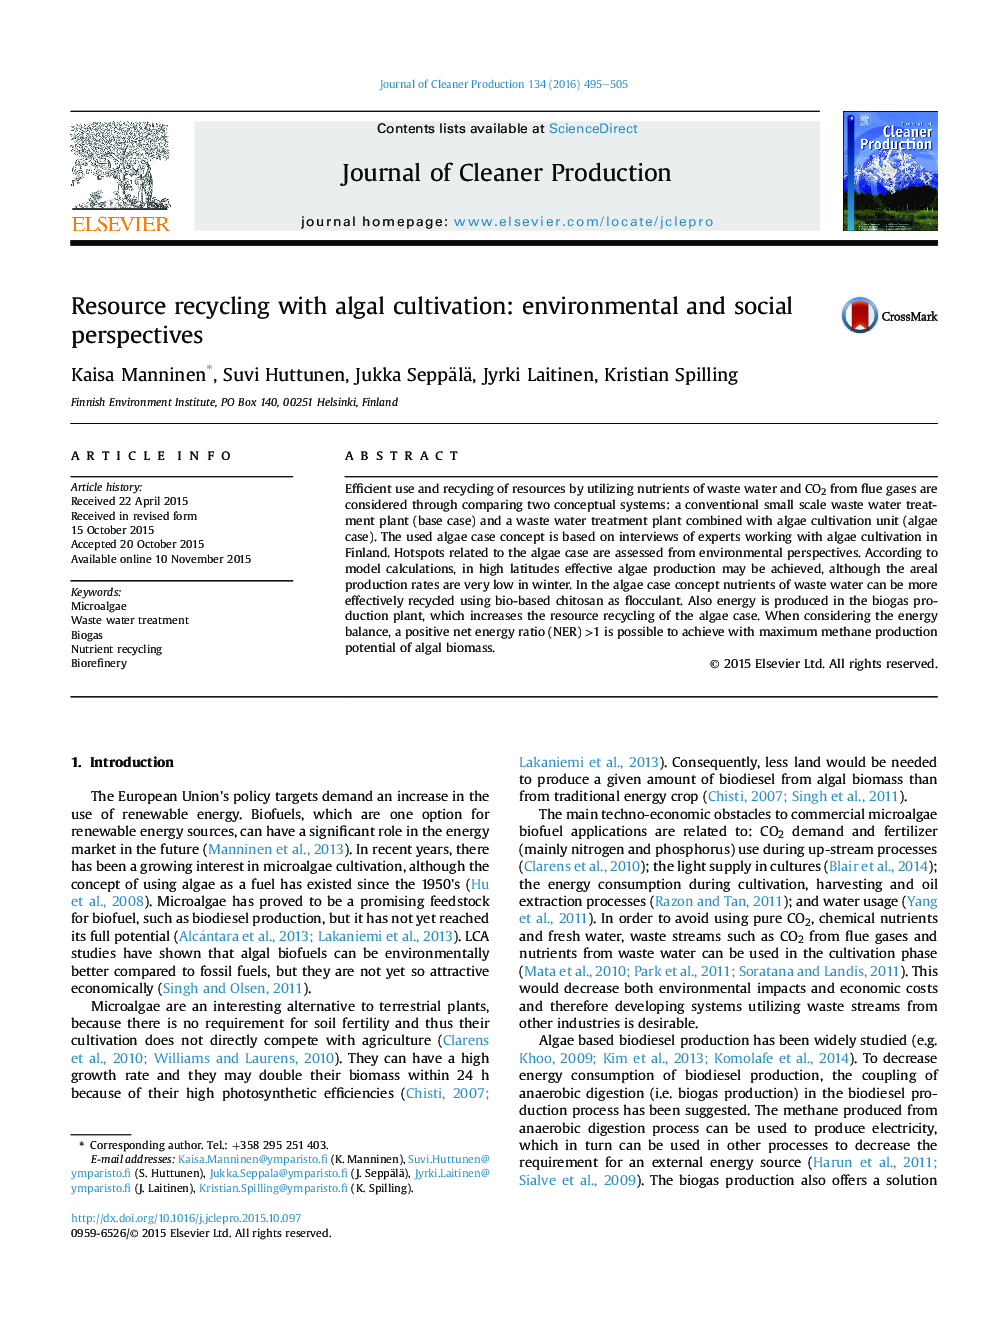 Resource recycling with algal cultivation: environmental and social perspectives